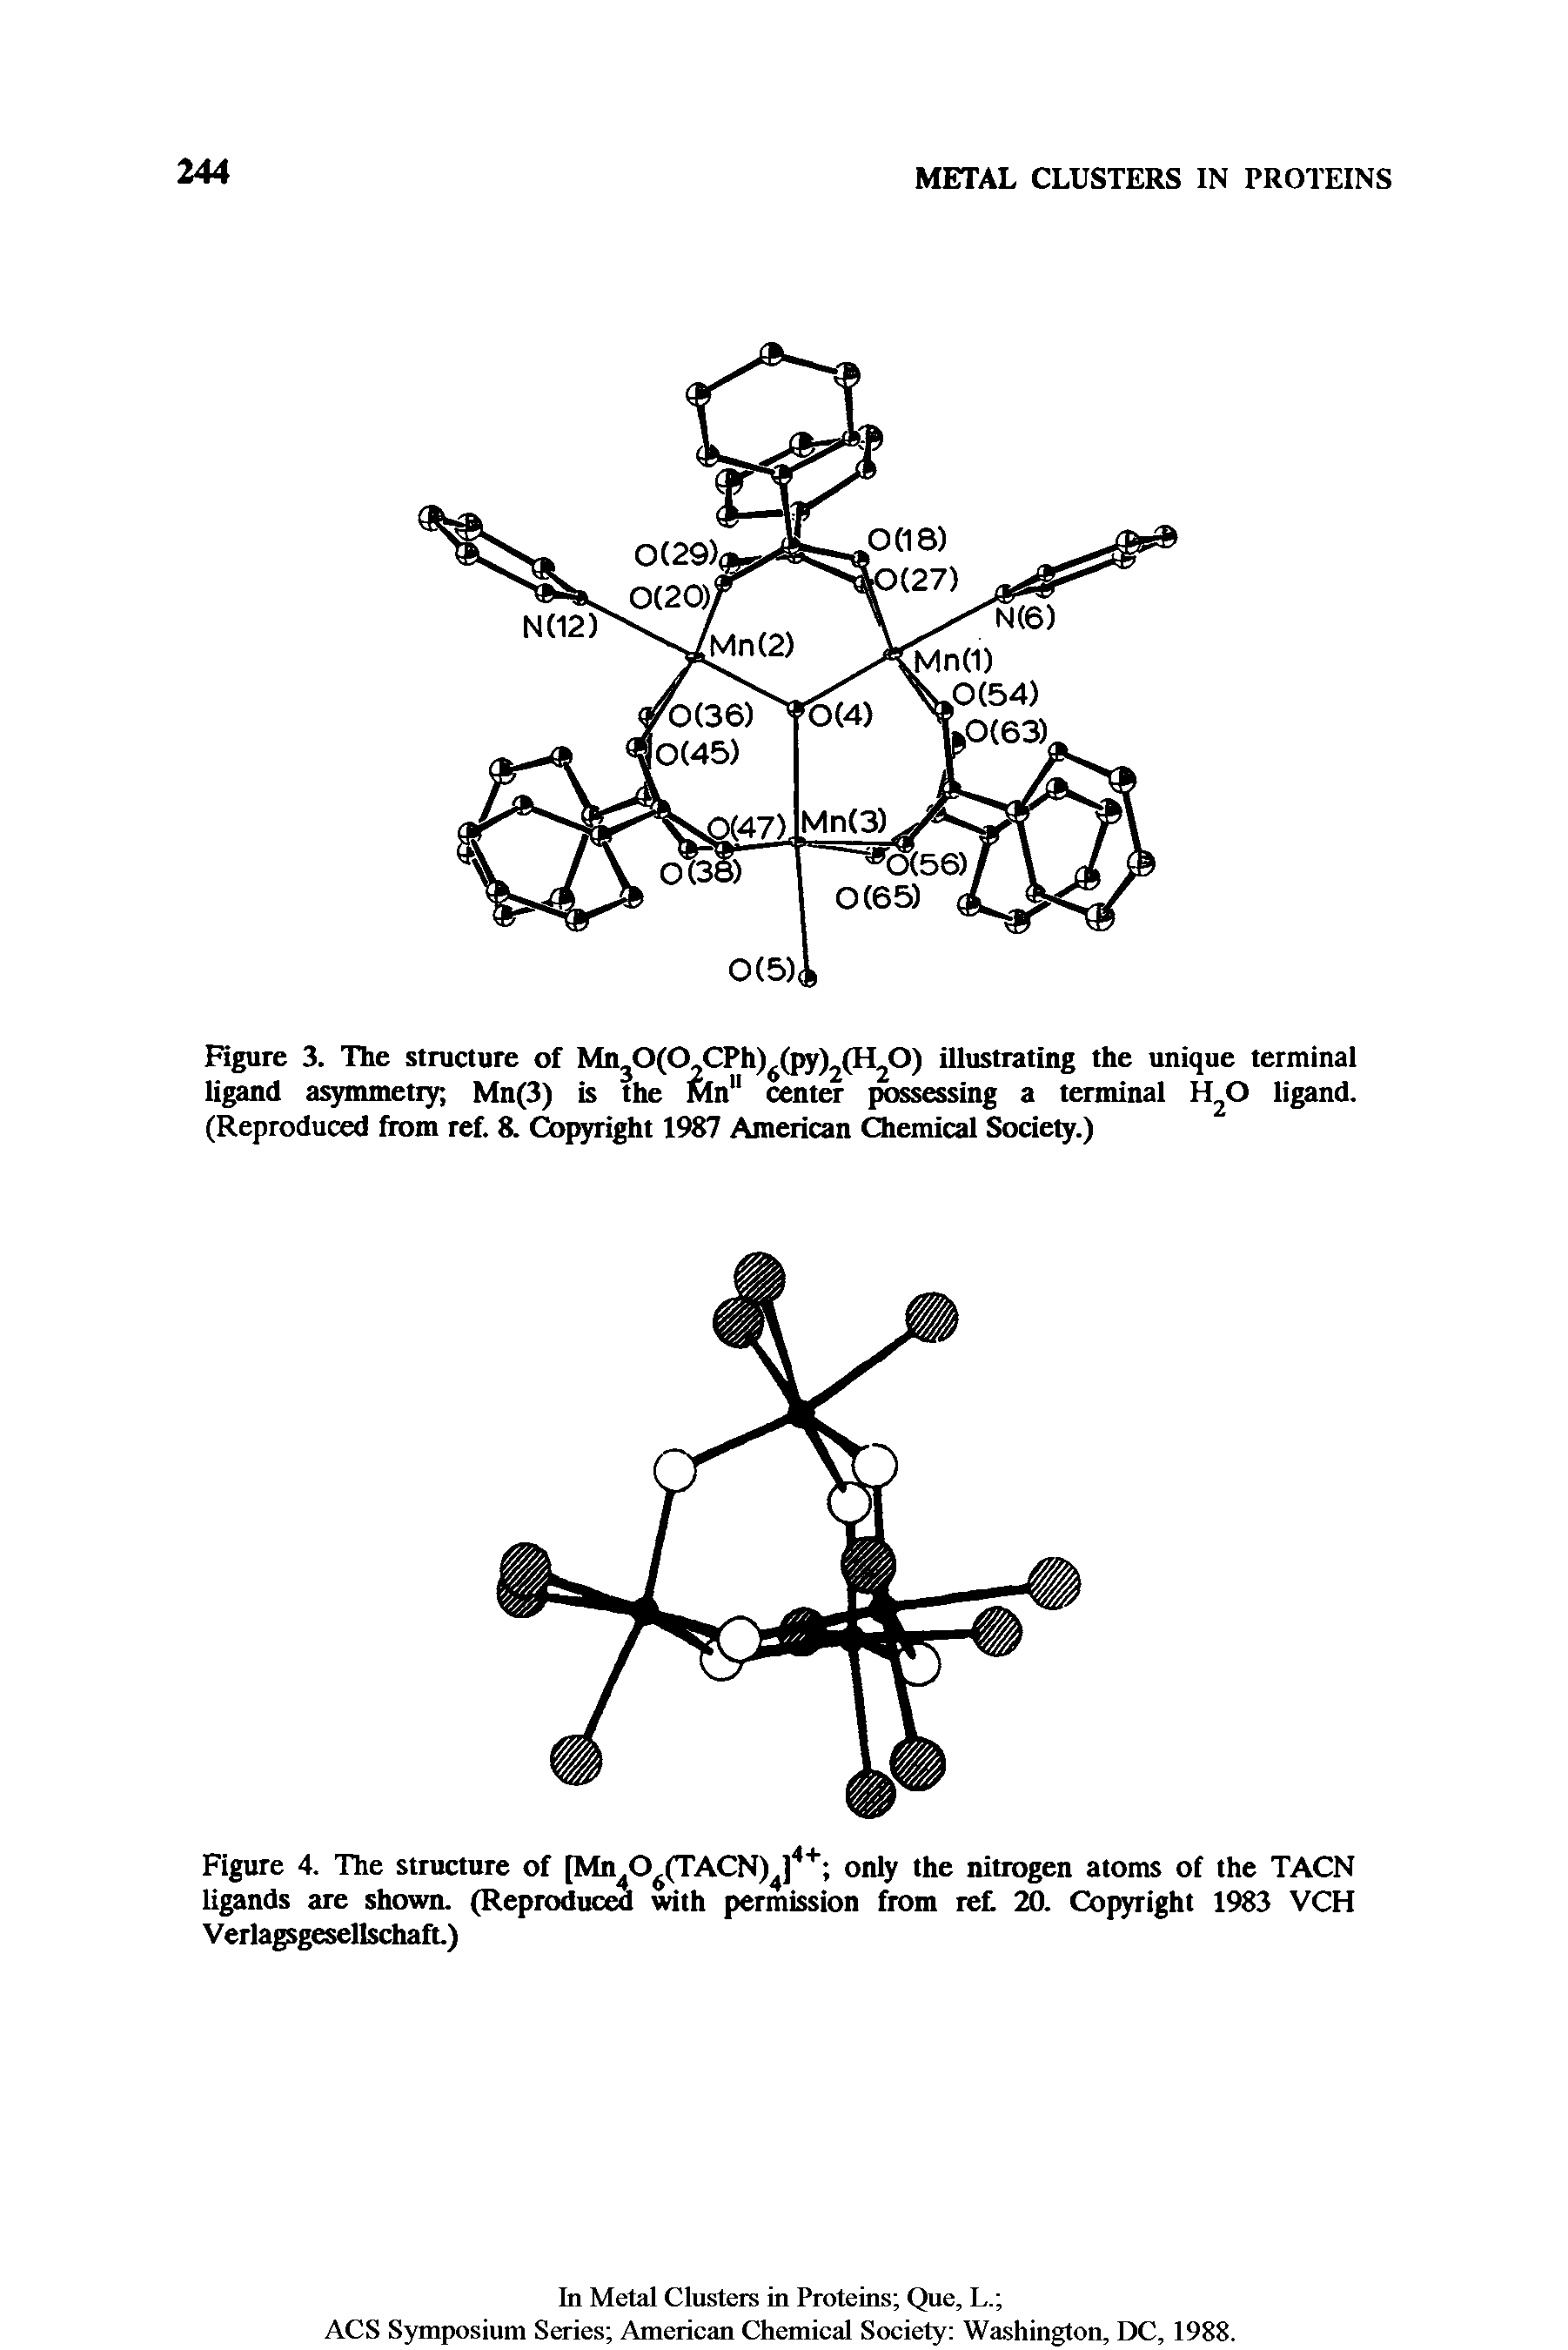 Figure 4. The structure of [Mn O (TACN) j] only the nitrogen atoms of the TACN ligands are shown. (Reproduced with permission from ret 20. Copyright 1983 VCH VerlagsgesellschafL)...